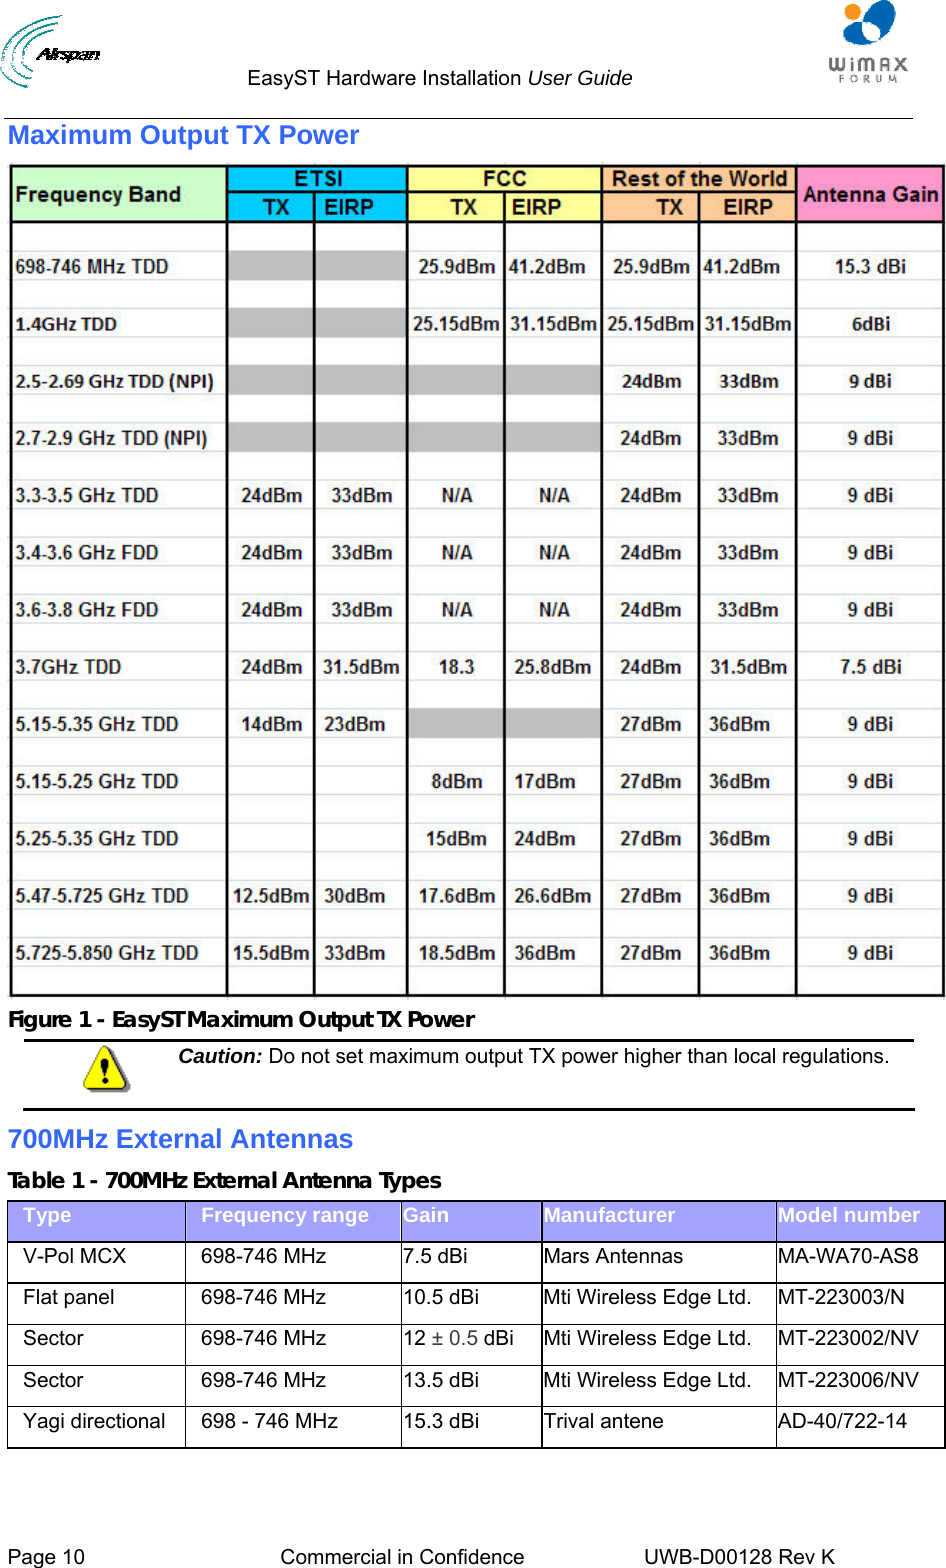                                  EasyST Hardware Installation User Guide     Page 10  Commercial in Confidence  UWB-D00128 Rev K   Maximum Output TX Power  Figure 1 - EasyST Maximum Output TX Power  Caution: Do not set maximum output TX power higher than local regulations. 700MHz External Antennas Table 1 - 700MHz External Antenna Types Type  Frequency range  Gain  Manufacturer  Model number V-Pol MCX  698-746 MHz  7.5 dBi  Mars Antennas  MA-WA70-AS8 Flat panel  698-746 MHz  10.5 dBi  Mti Wireless Edge Ltd.  MT-223003/N Sector 698-746 MHz 12 ± 0.5 dBi  Mti Wireless Edge Ltd.  MT-223002/NV Sector  698-746 MHz  13.5 dBi  Mti Wireless Edge Ltd.  MT-223006/NV Yagi directional  698 - 746 MHz  15.3 dBi  Trival antene  AD-40/722-14  